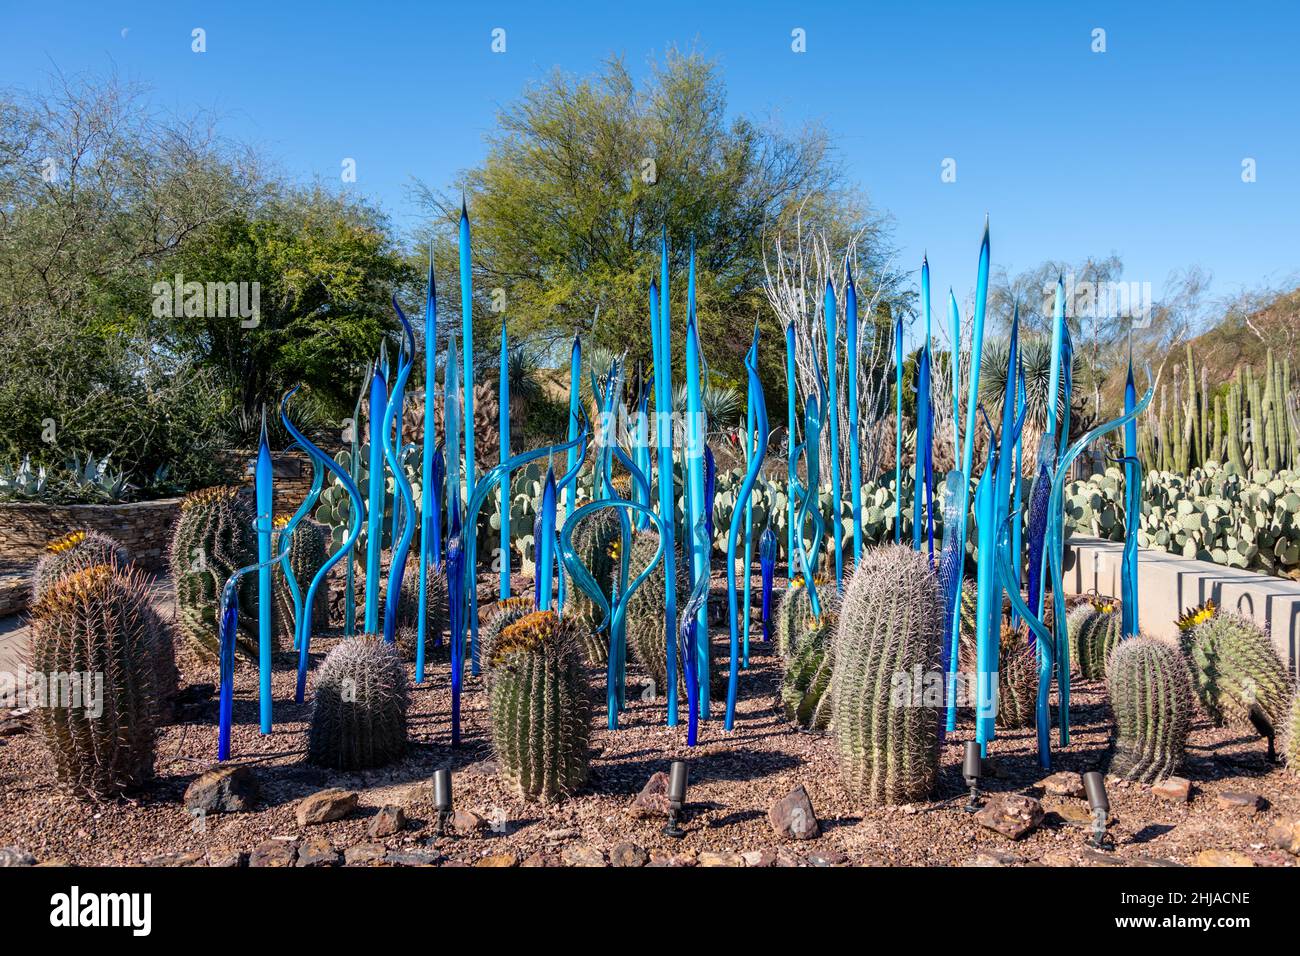 Chihuly In The Garden, Blue Birch Reeds and Scorpion Tails, 2021 Stock Photo